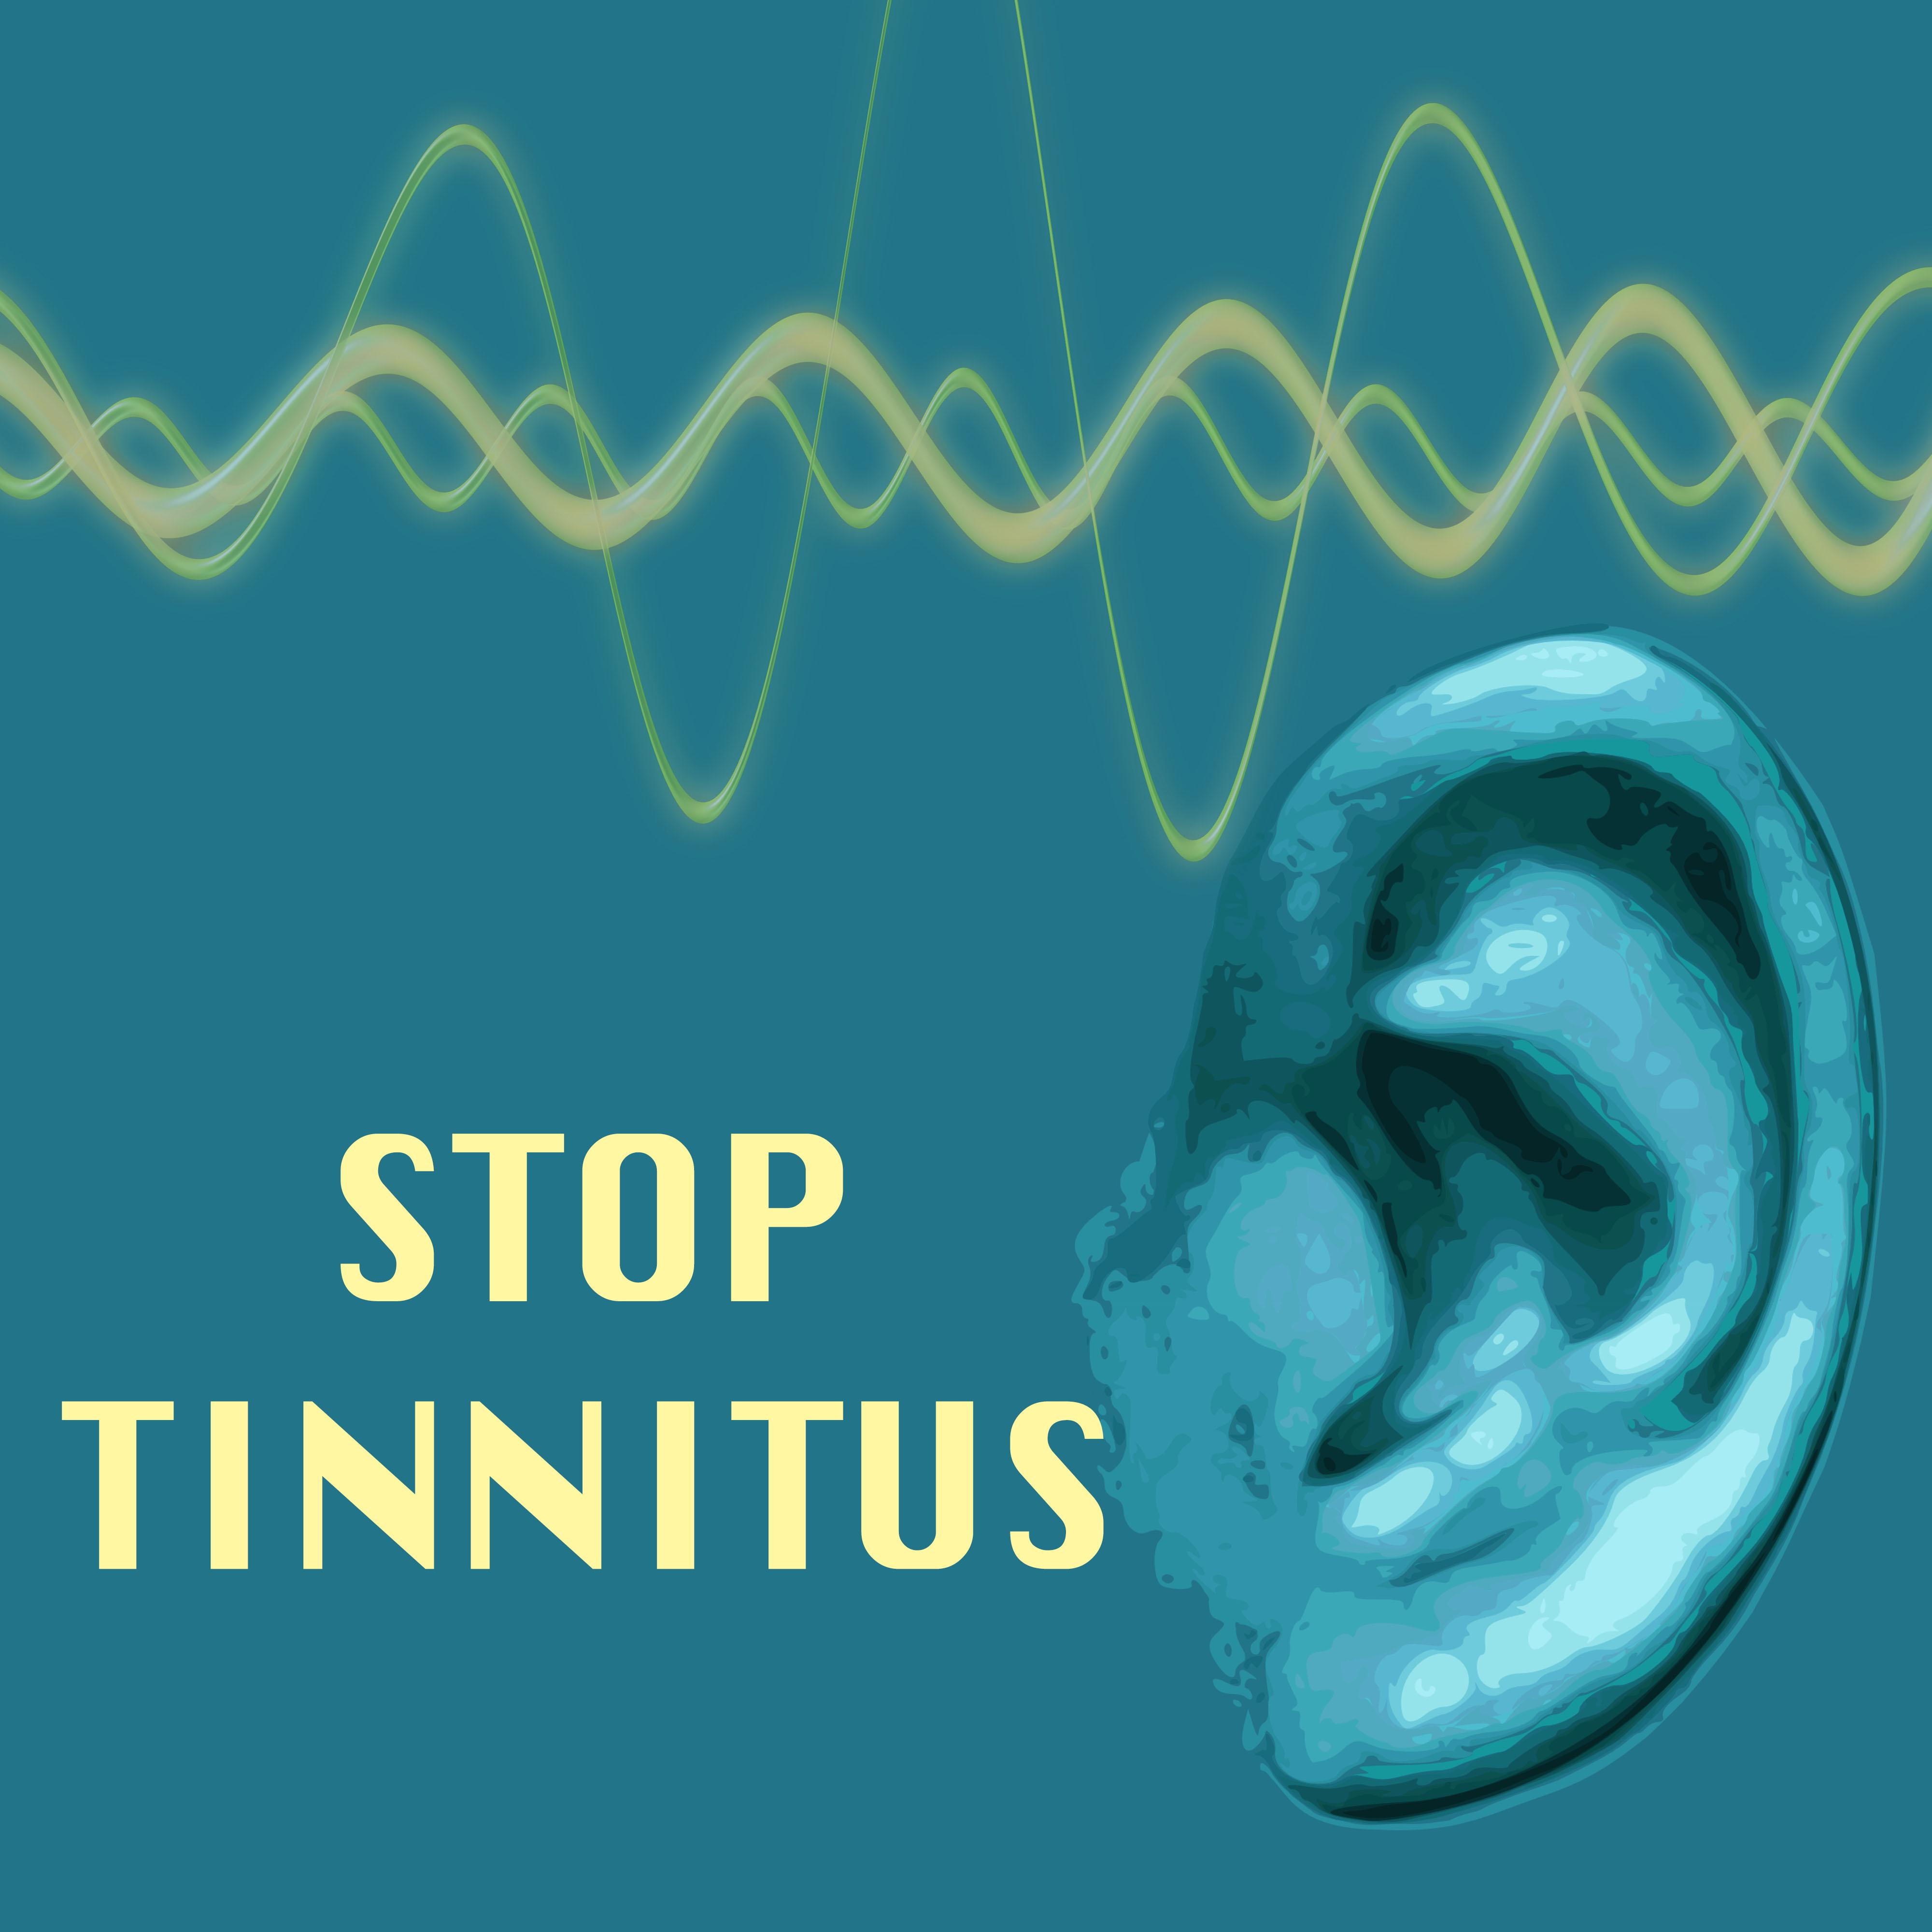 Stop Tinnitus - White Noise Treatment for Tinnitus & Whistling in Ear Cure